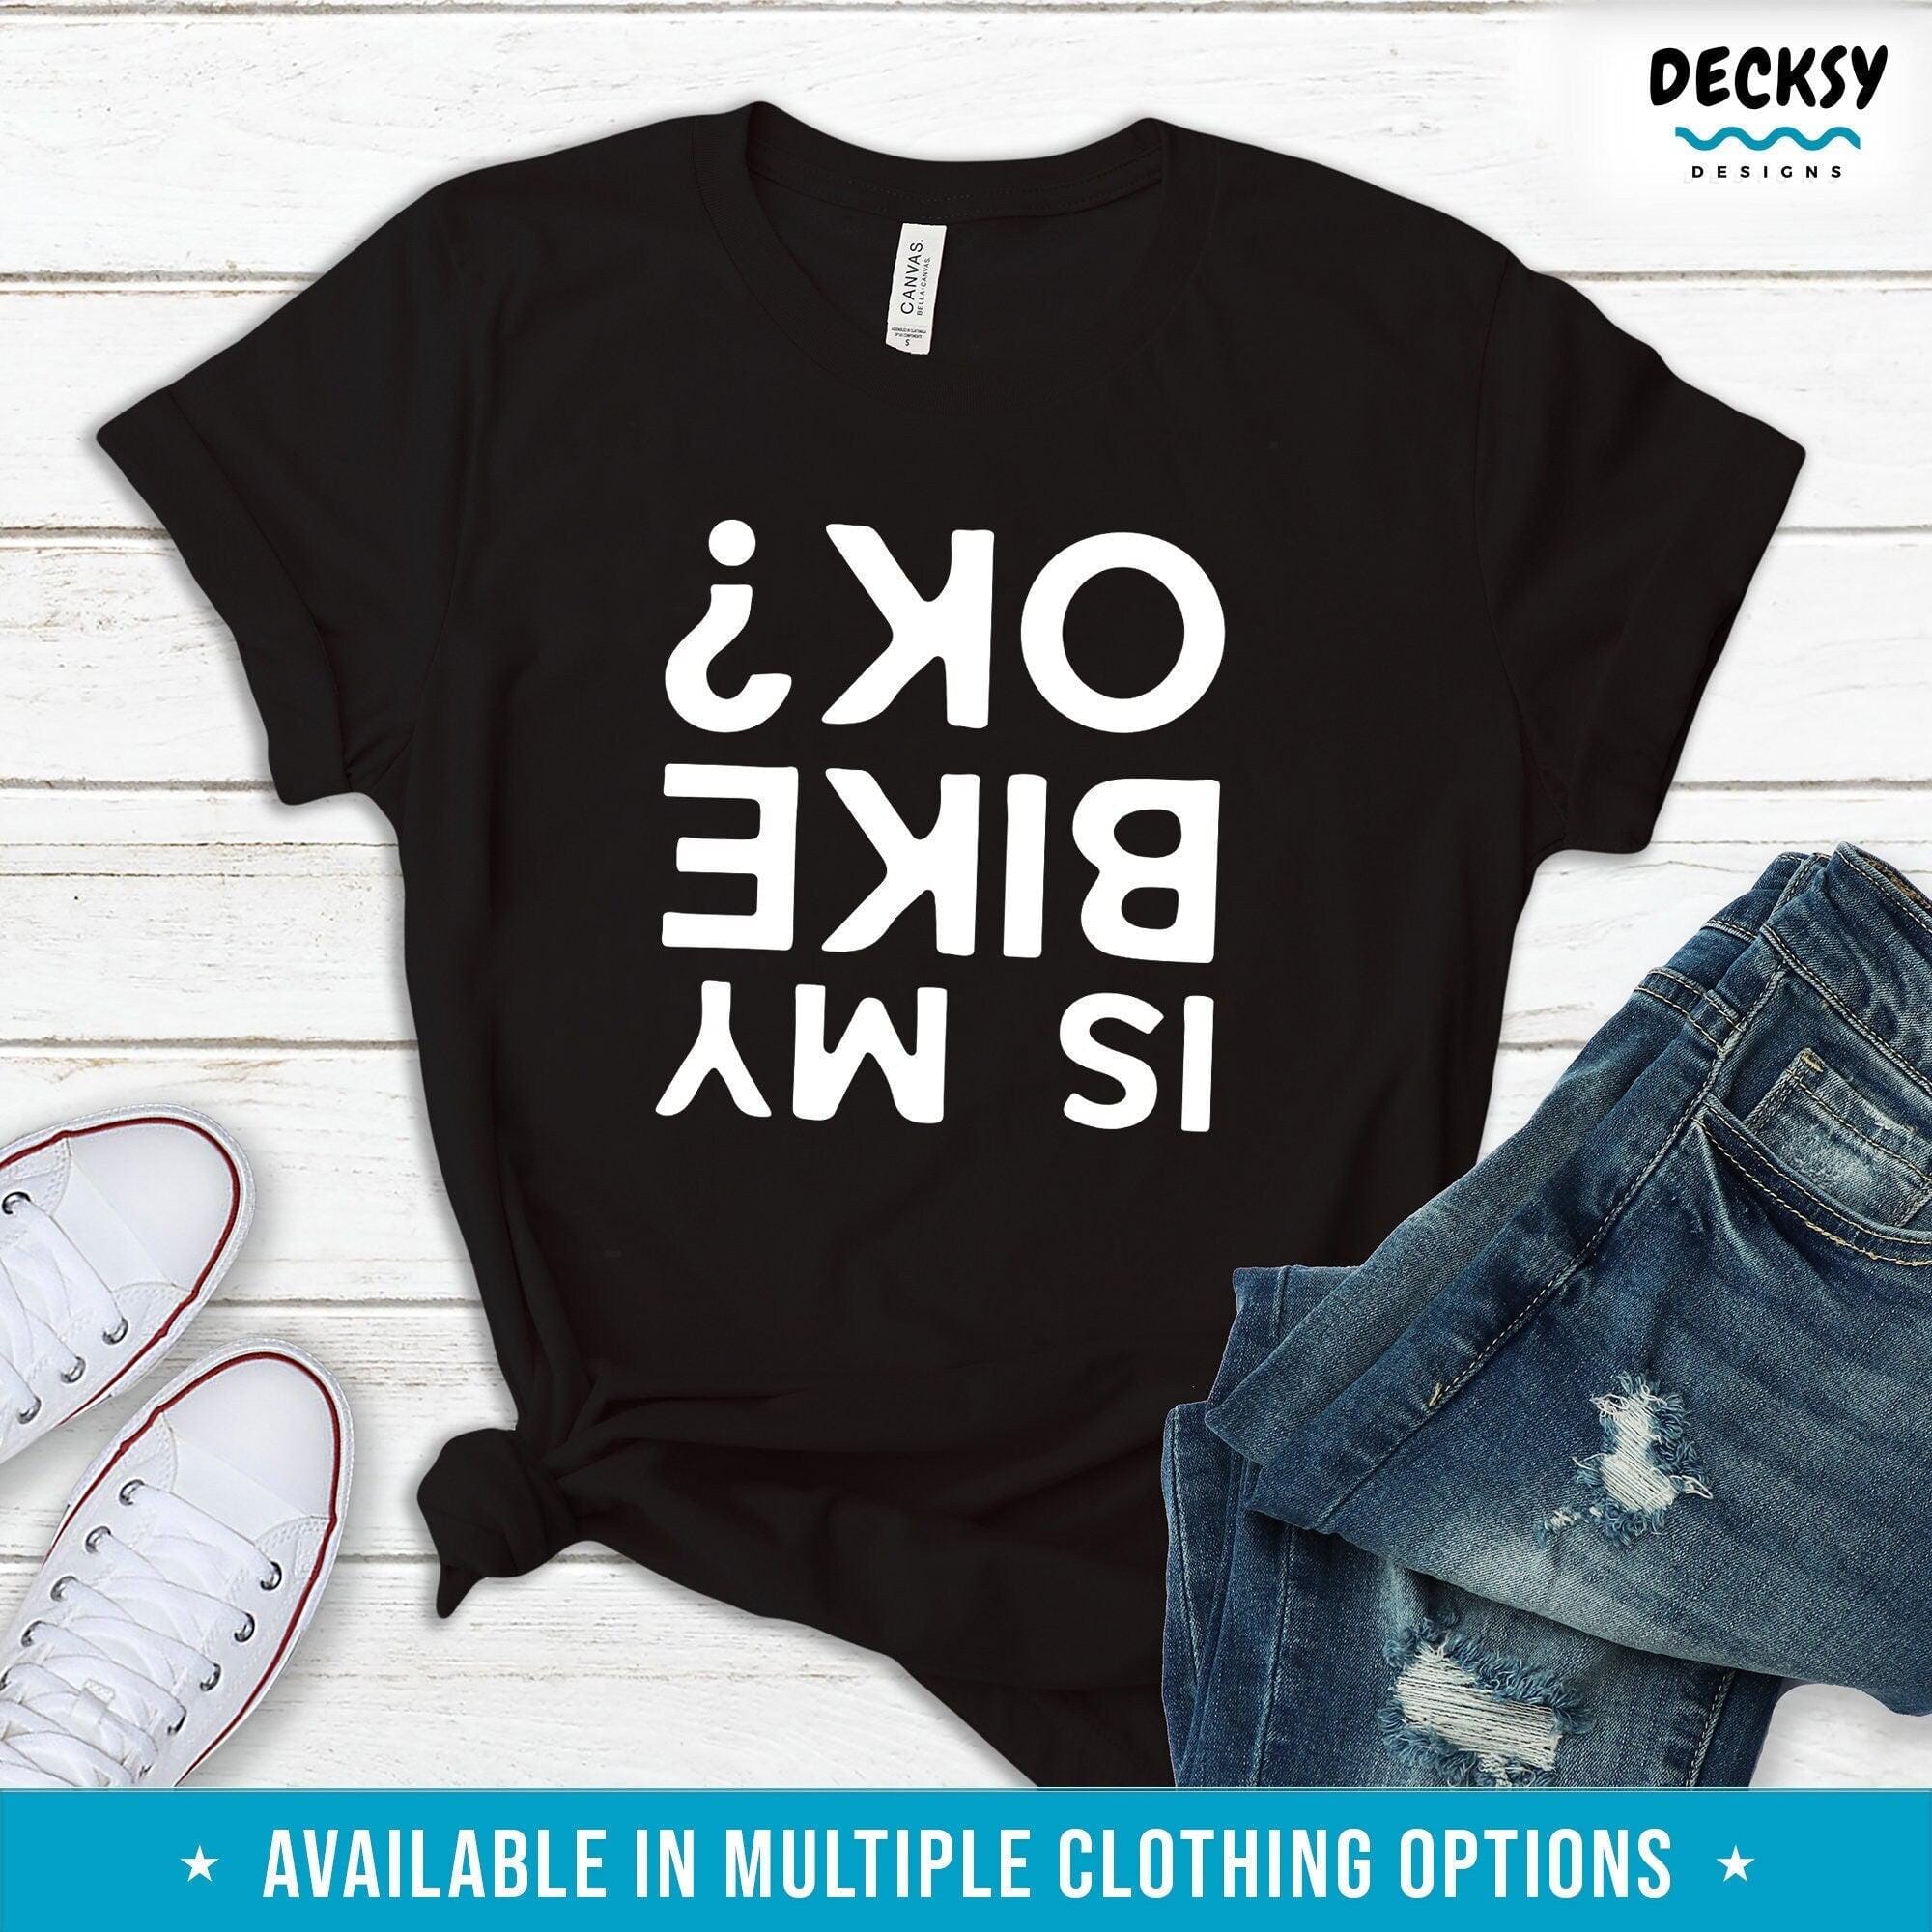 Funny Bicycle Shirt, Biker Gift-Clothing:Gender-Neutral Adult Clothing:Tops & Tees:T-shirts:Graphic Tees-DecksyDesigns